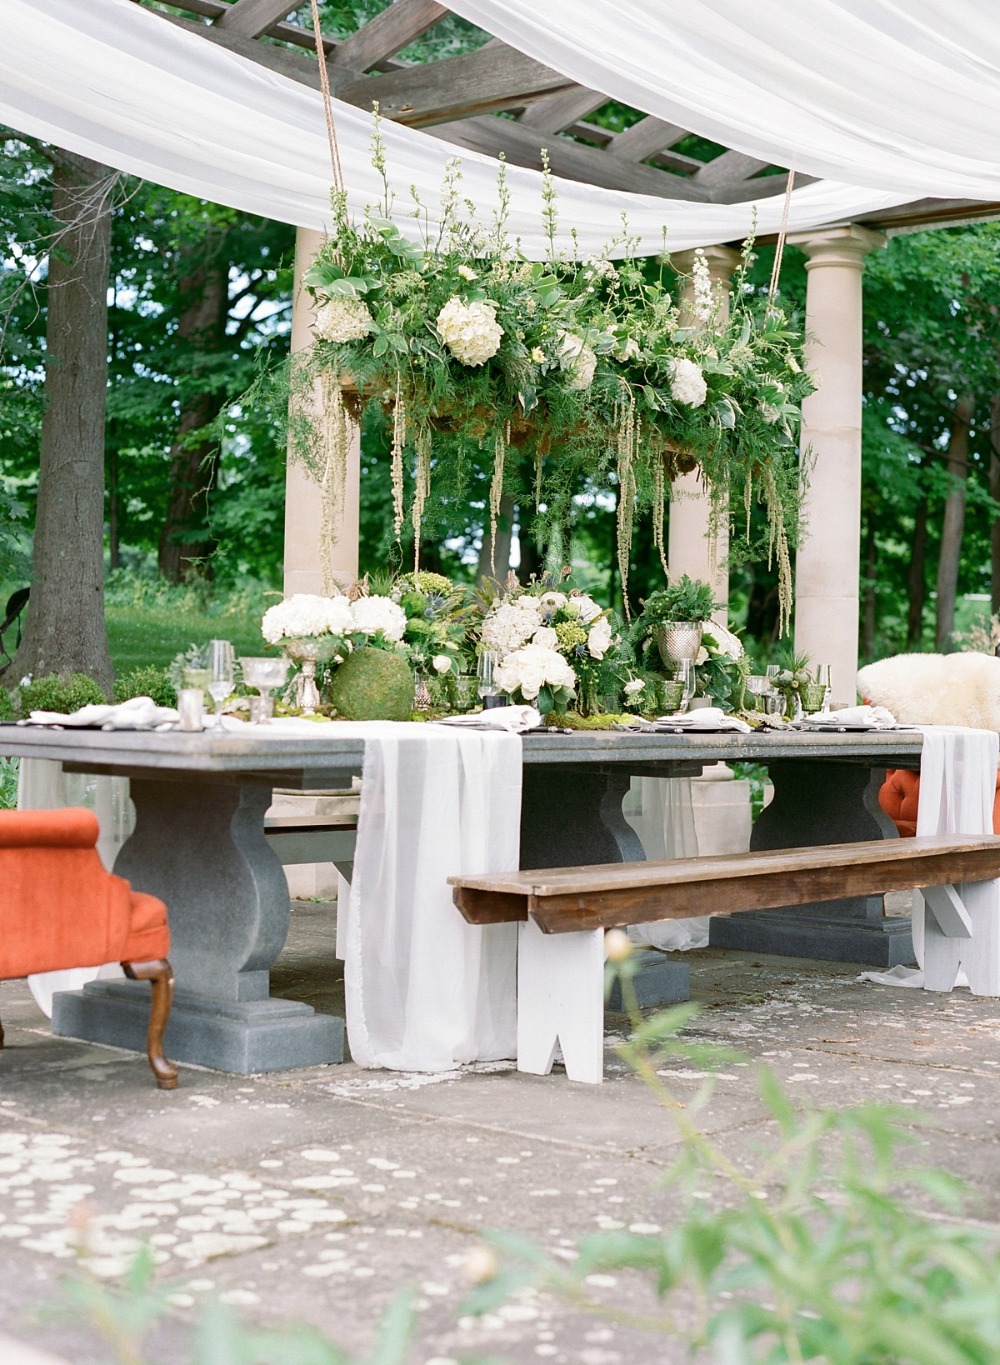 Beautiful natural tablescape with stone table